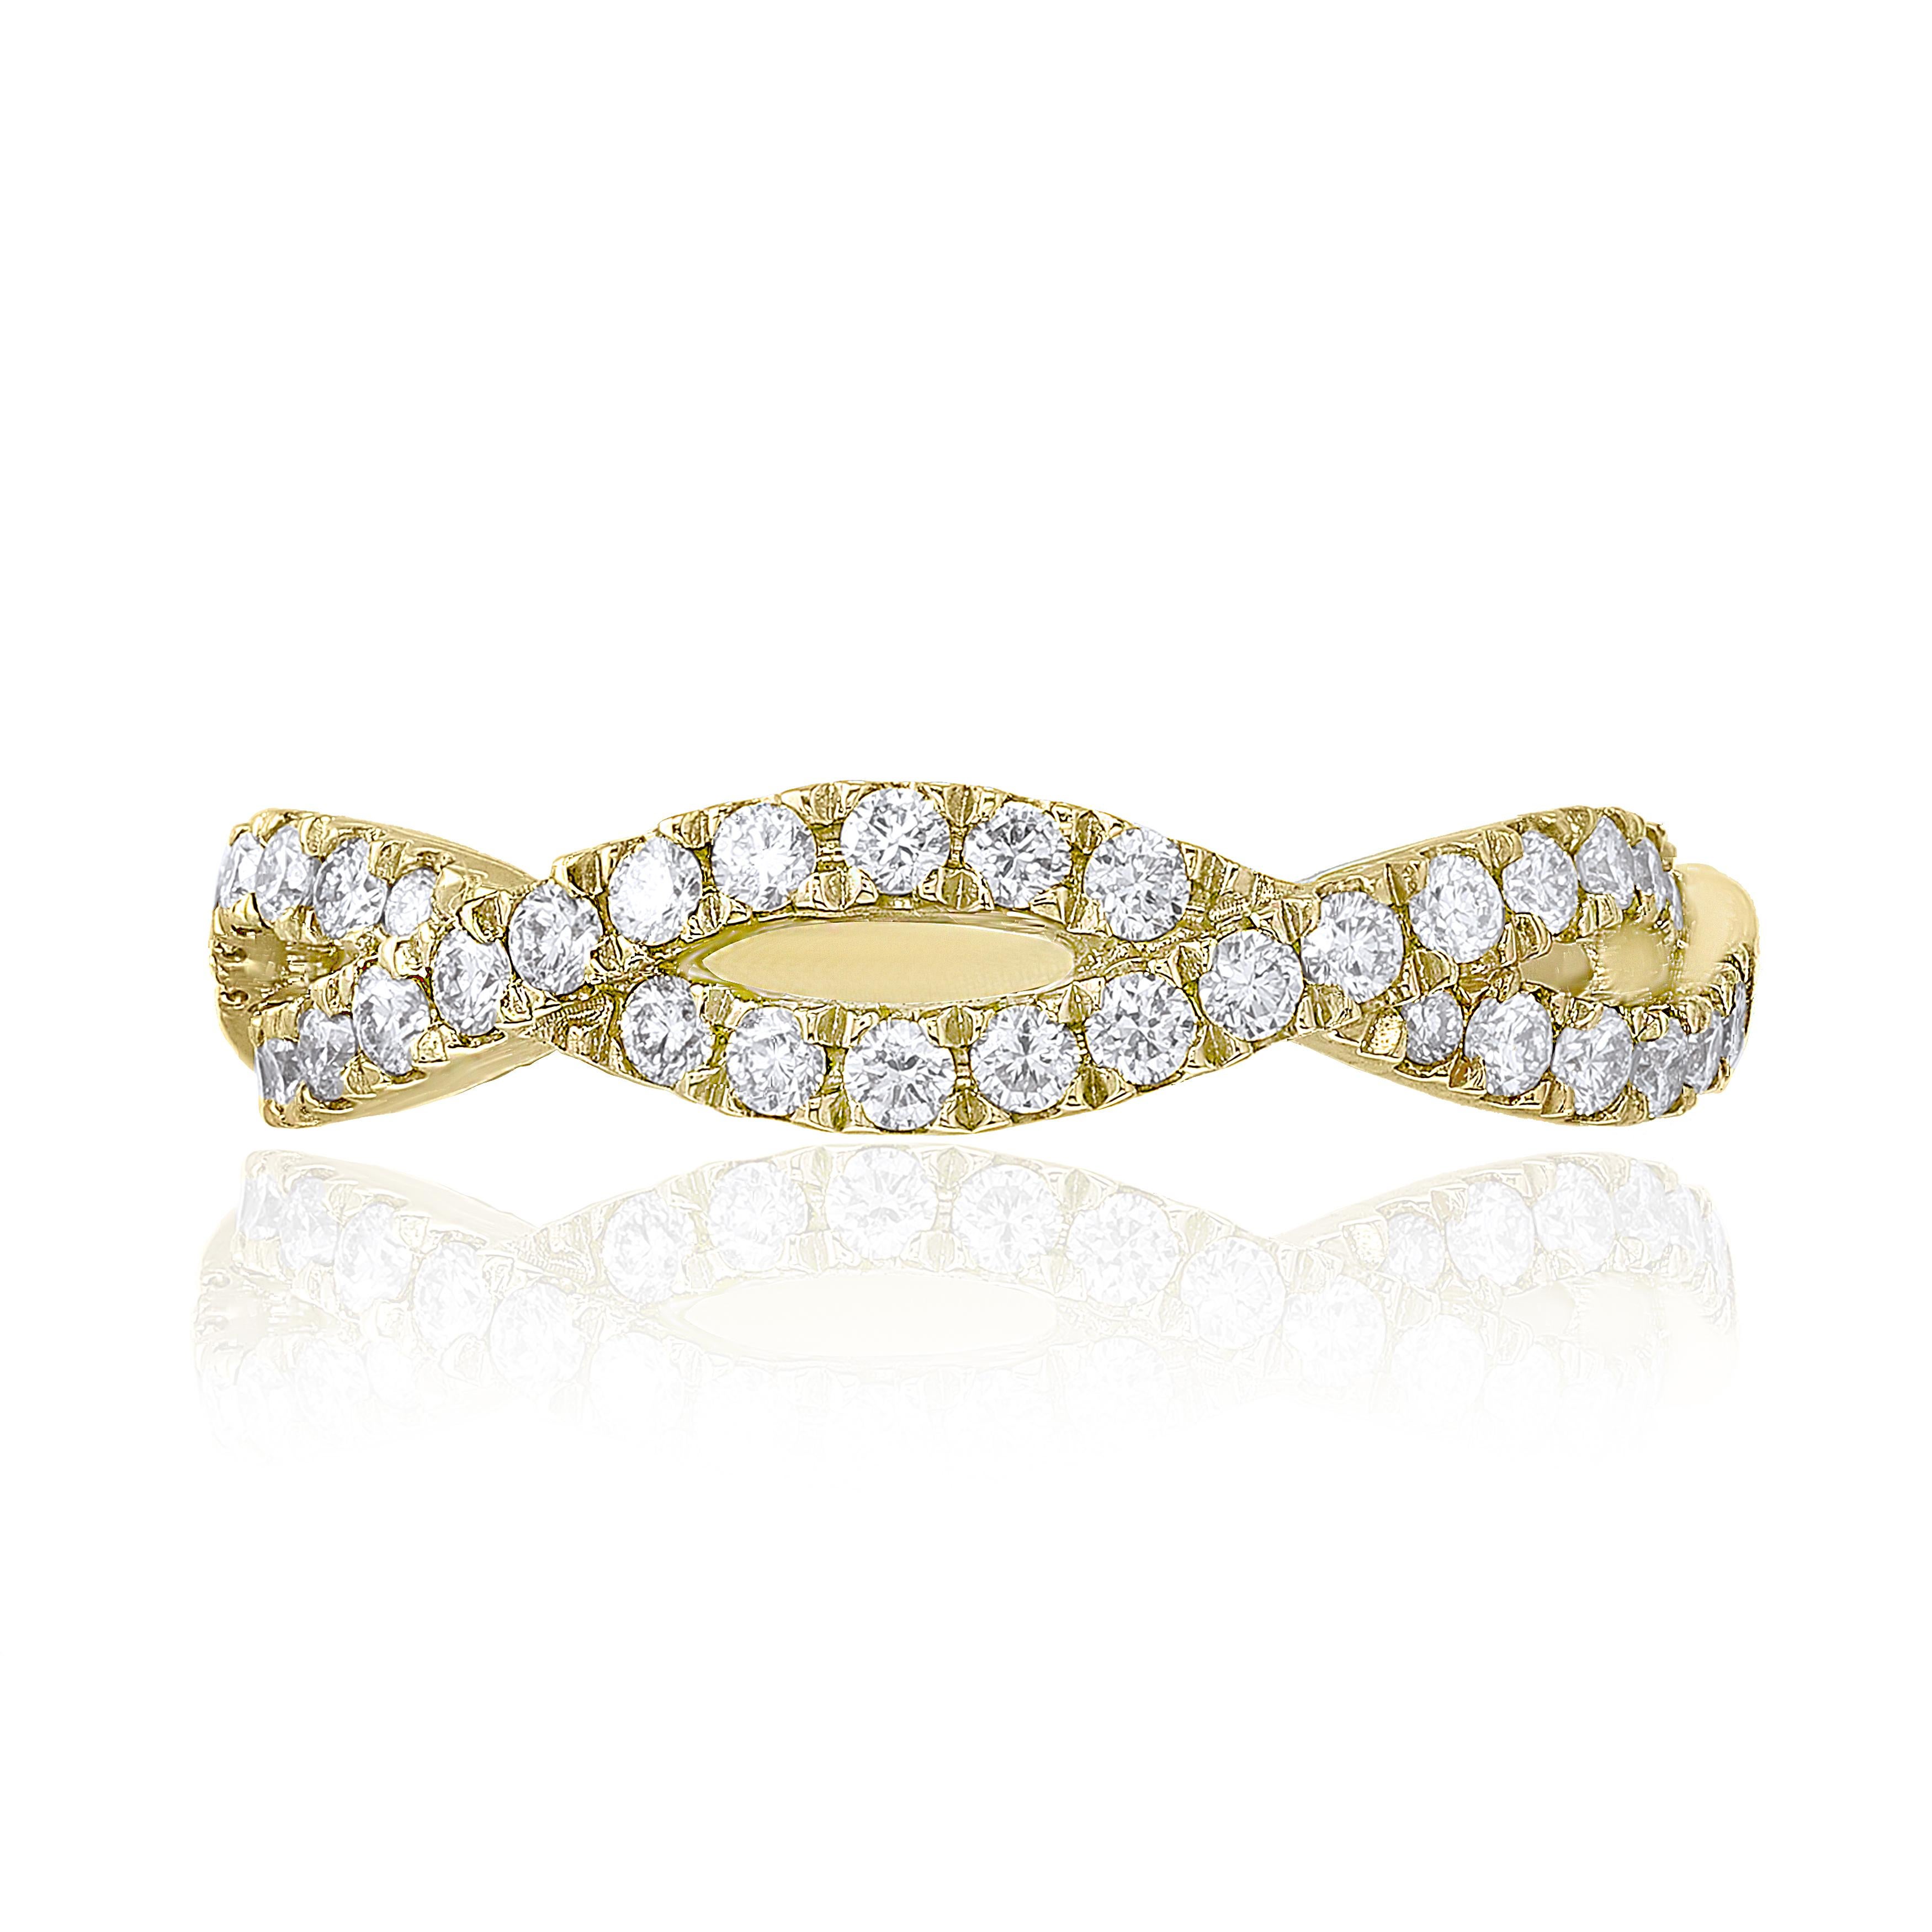 A unique take on the classic diamond wedding rings. Features 0.21 carat round diamonds set in 18k yellow gold. Two lines of sparkling diamonds intertwine to symbolize the infinite love between two people. 
Size 6.5 US (Sizable). One of a Kind 